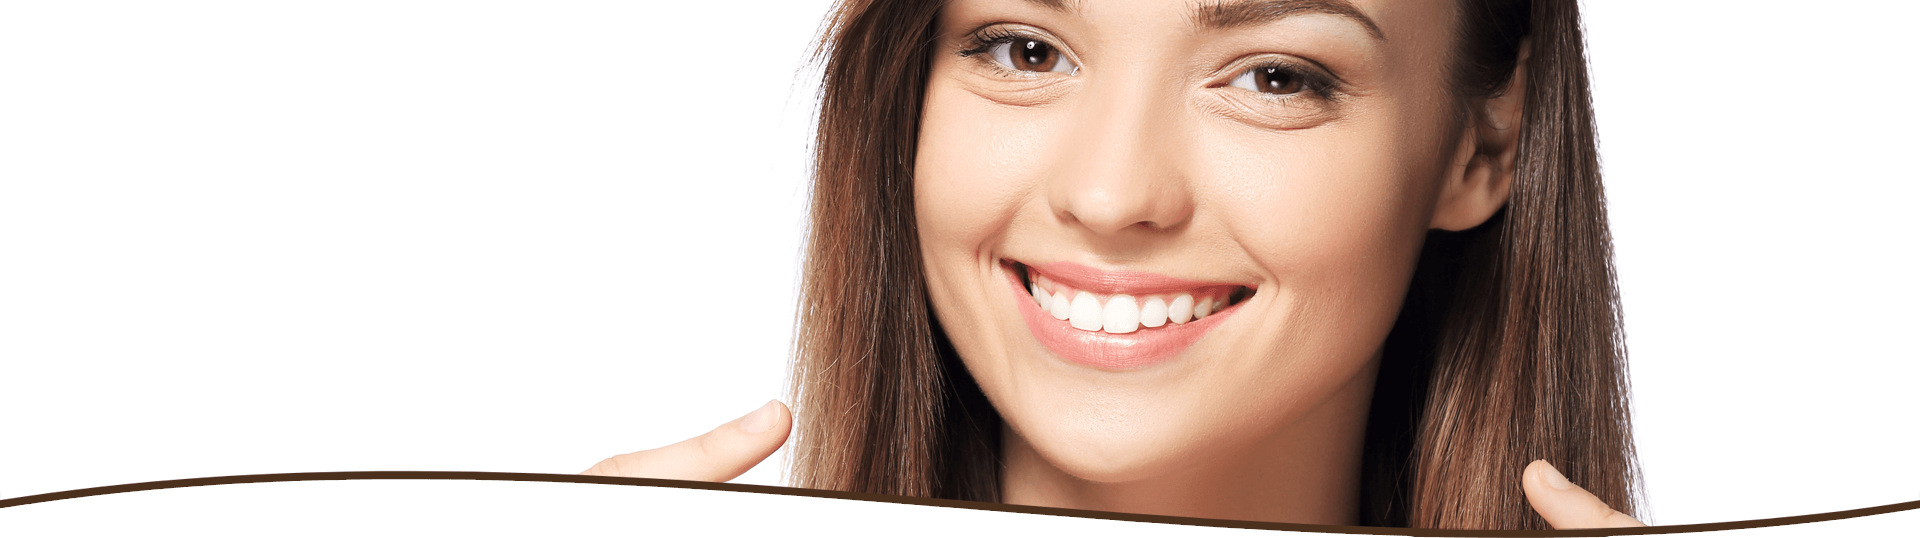 Smiling woman pointing at her teeth